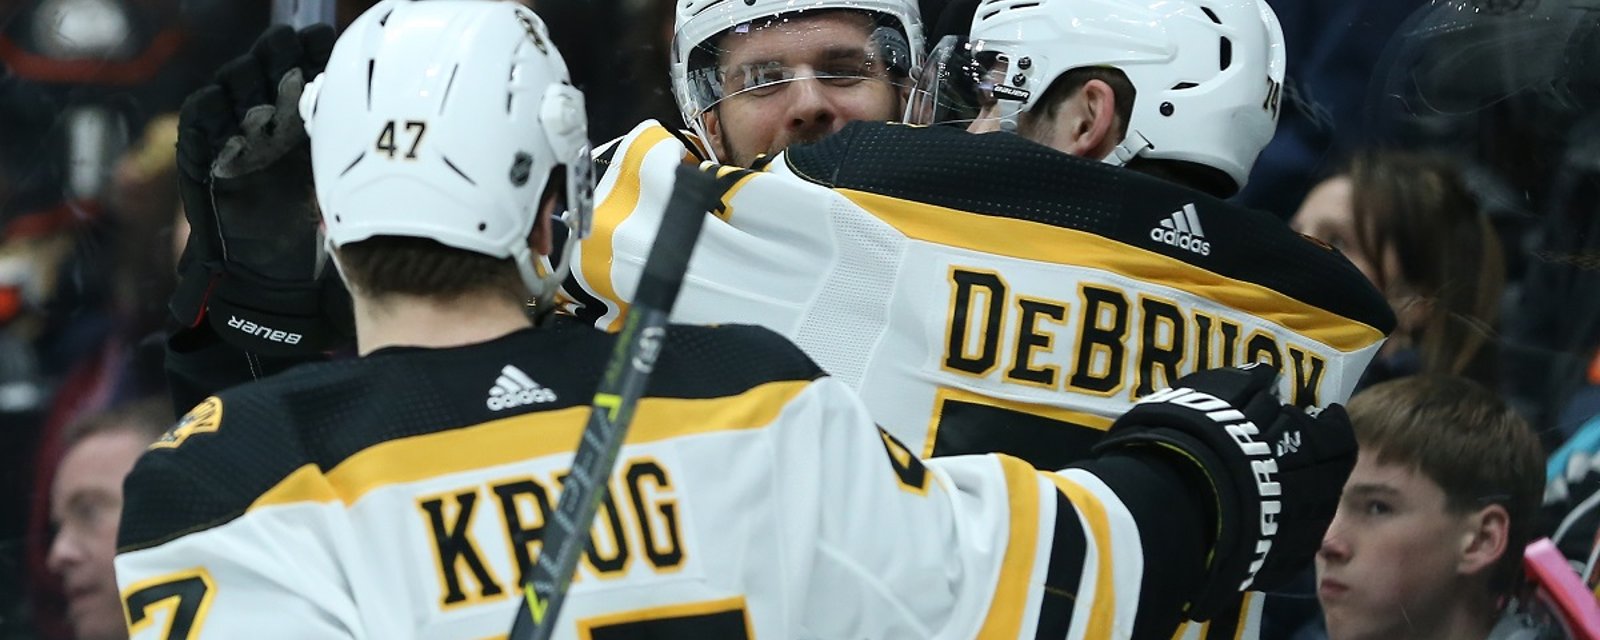 Breaking: Big update on David Krejci coming out of morning practice.